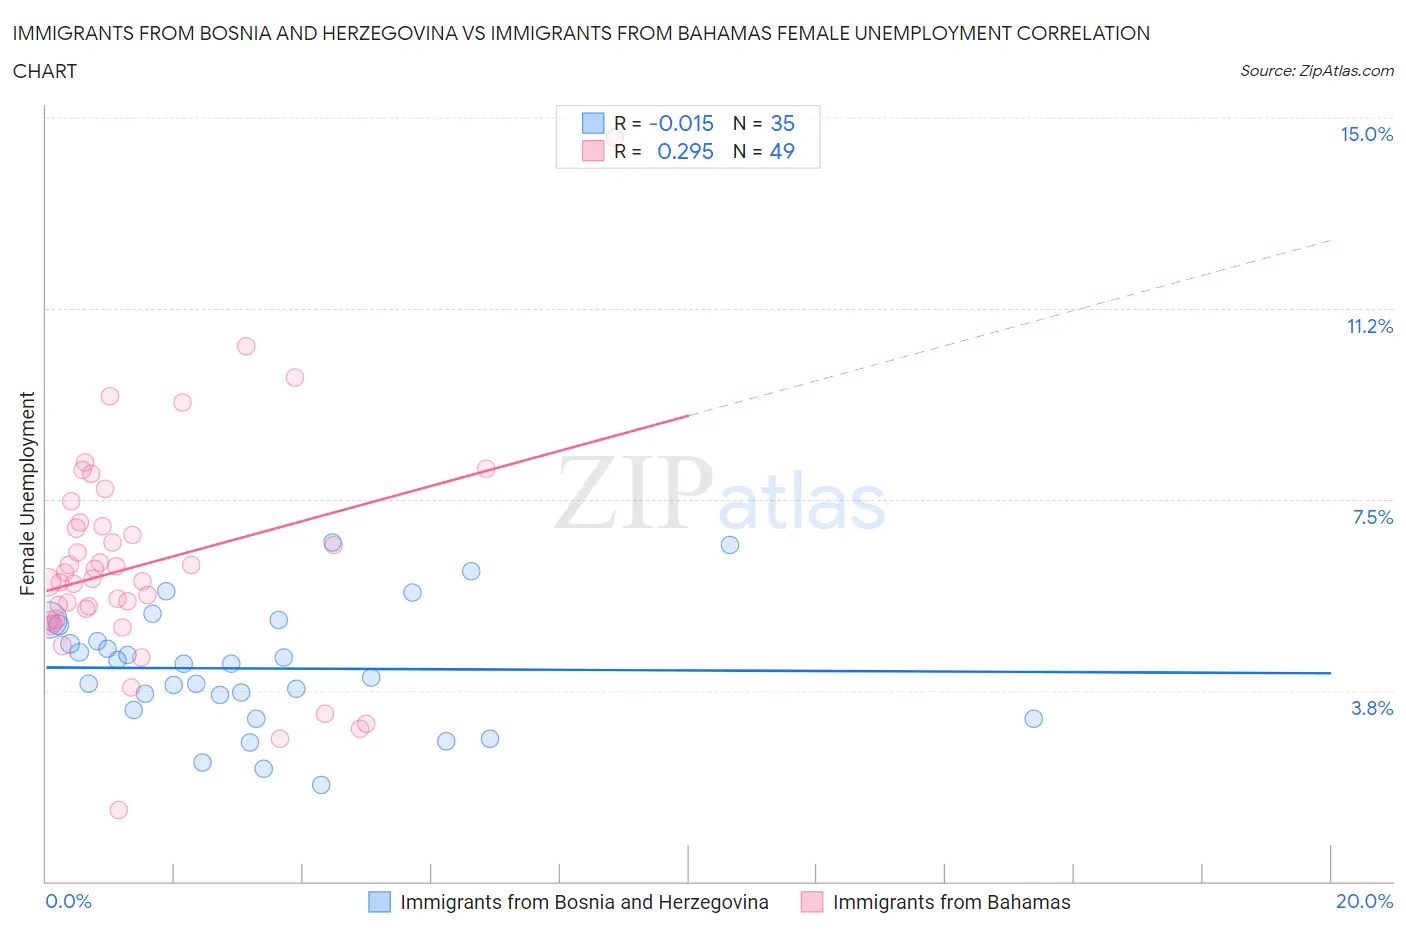 Immigrants from Bosnia and Herzegovina vs Immigrants from Bahamas Female Unemployment